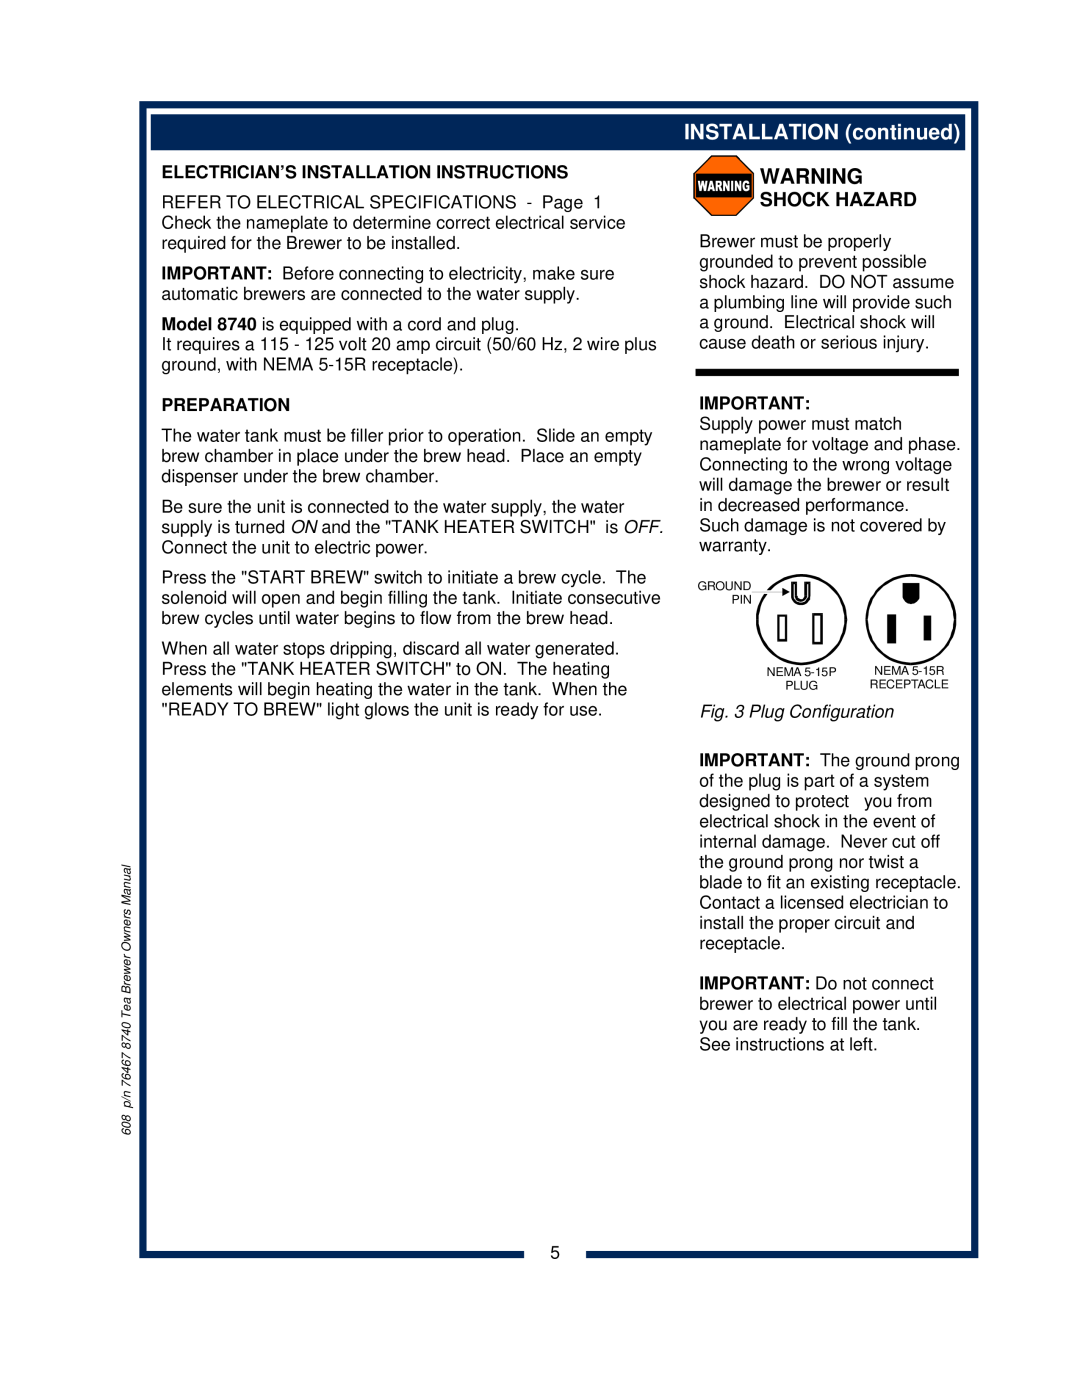 Bloomfield 8740 owner manual INSTALLATION continued, Shock Hazard, Electrician’S Installation Instructions, Preparation 